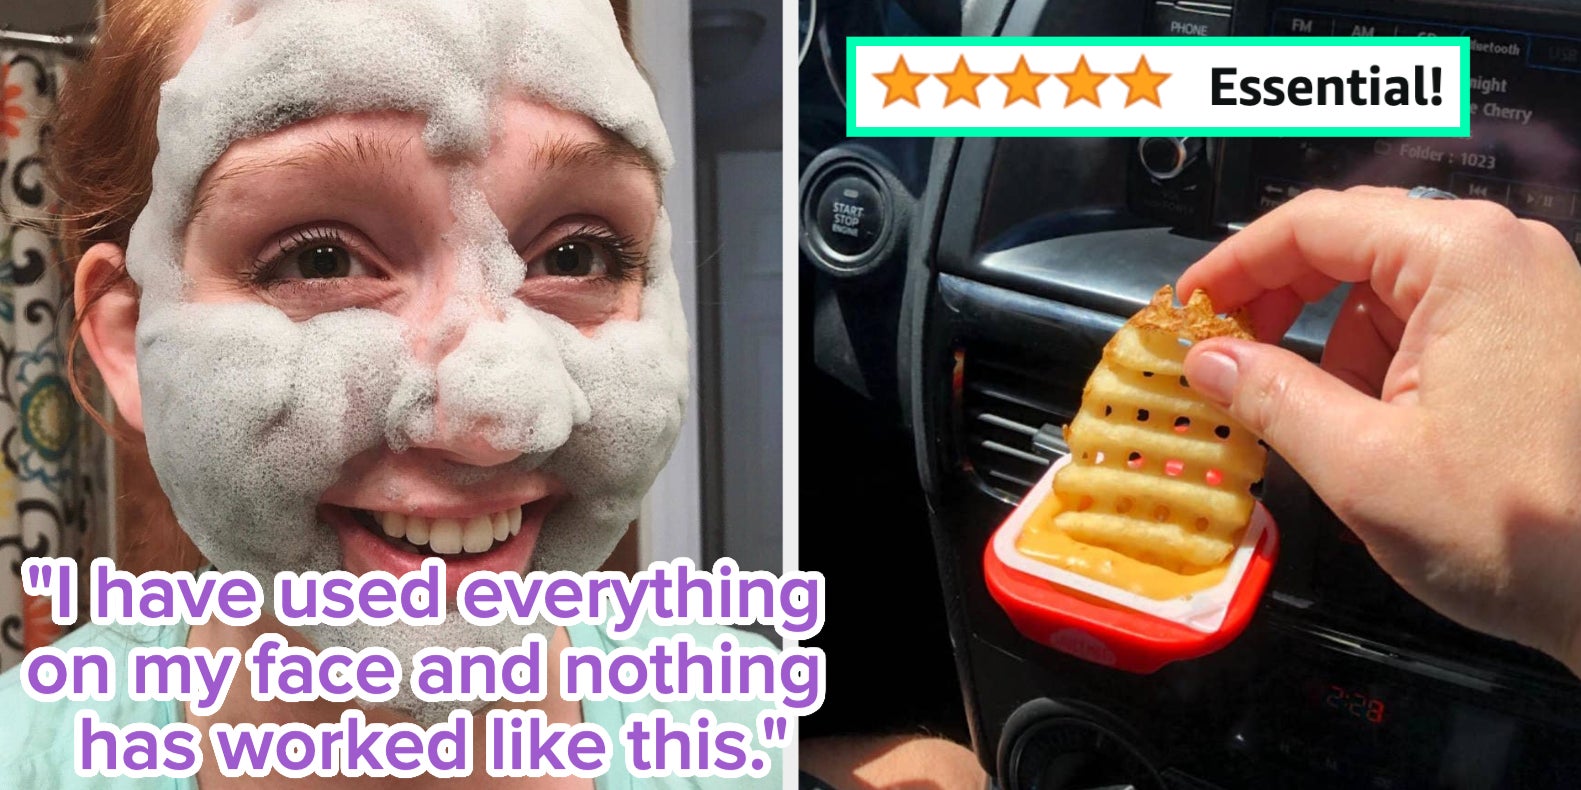 51 Cheap Alternatives To Expensive Products You'll Feel Like A